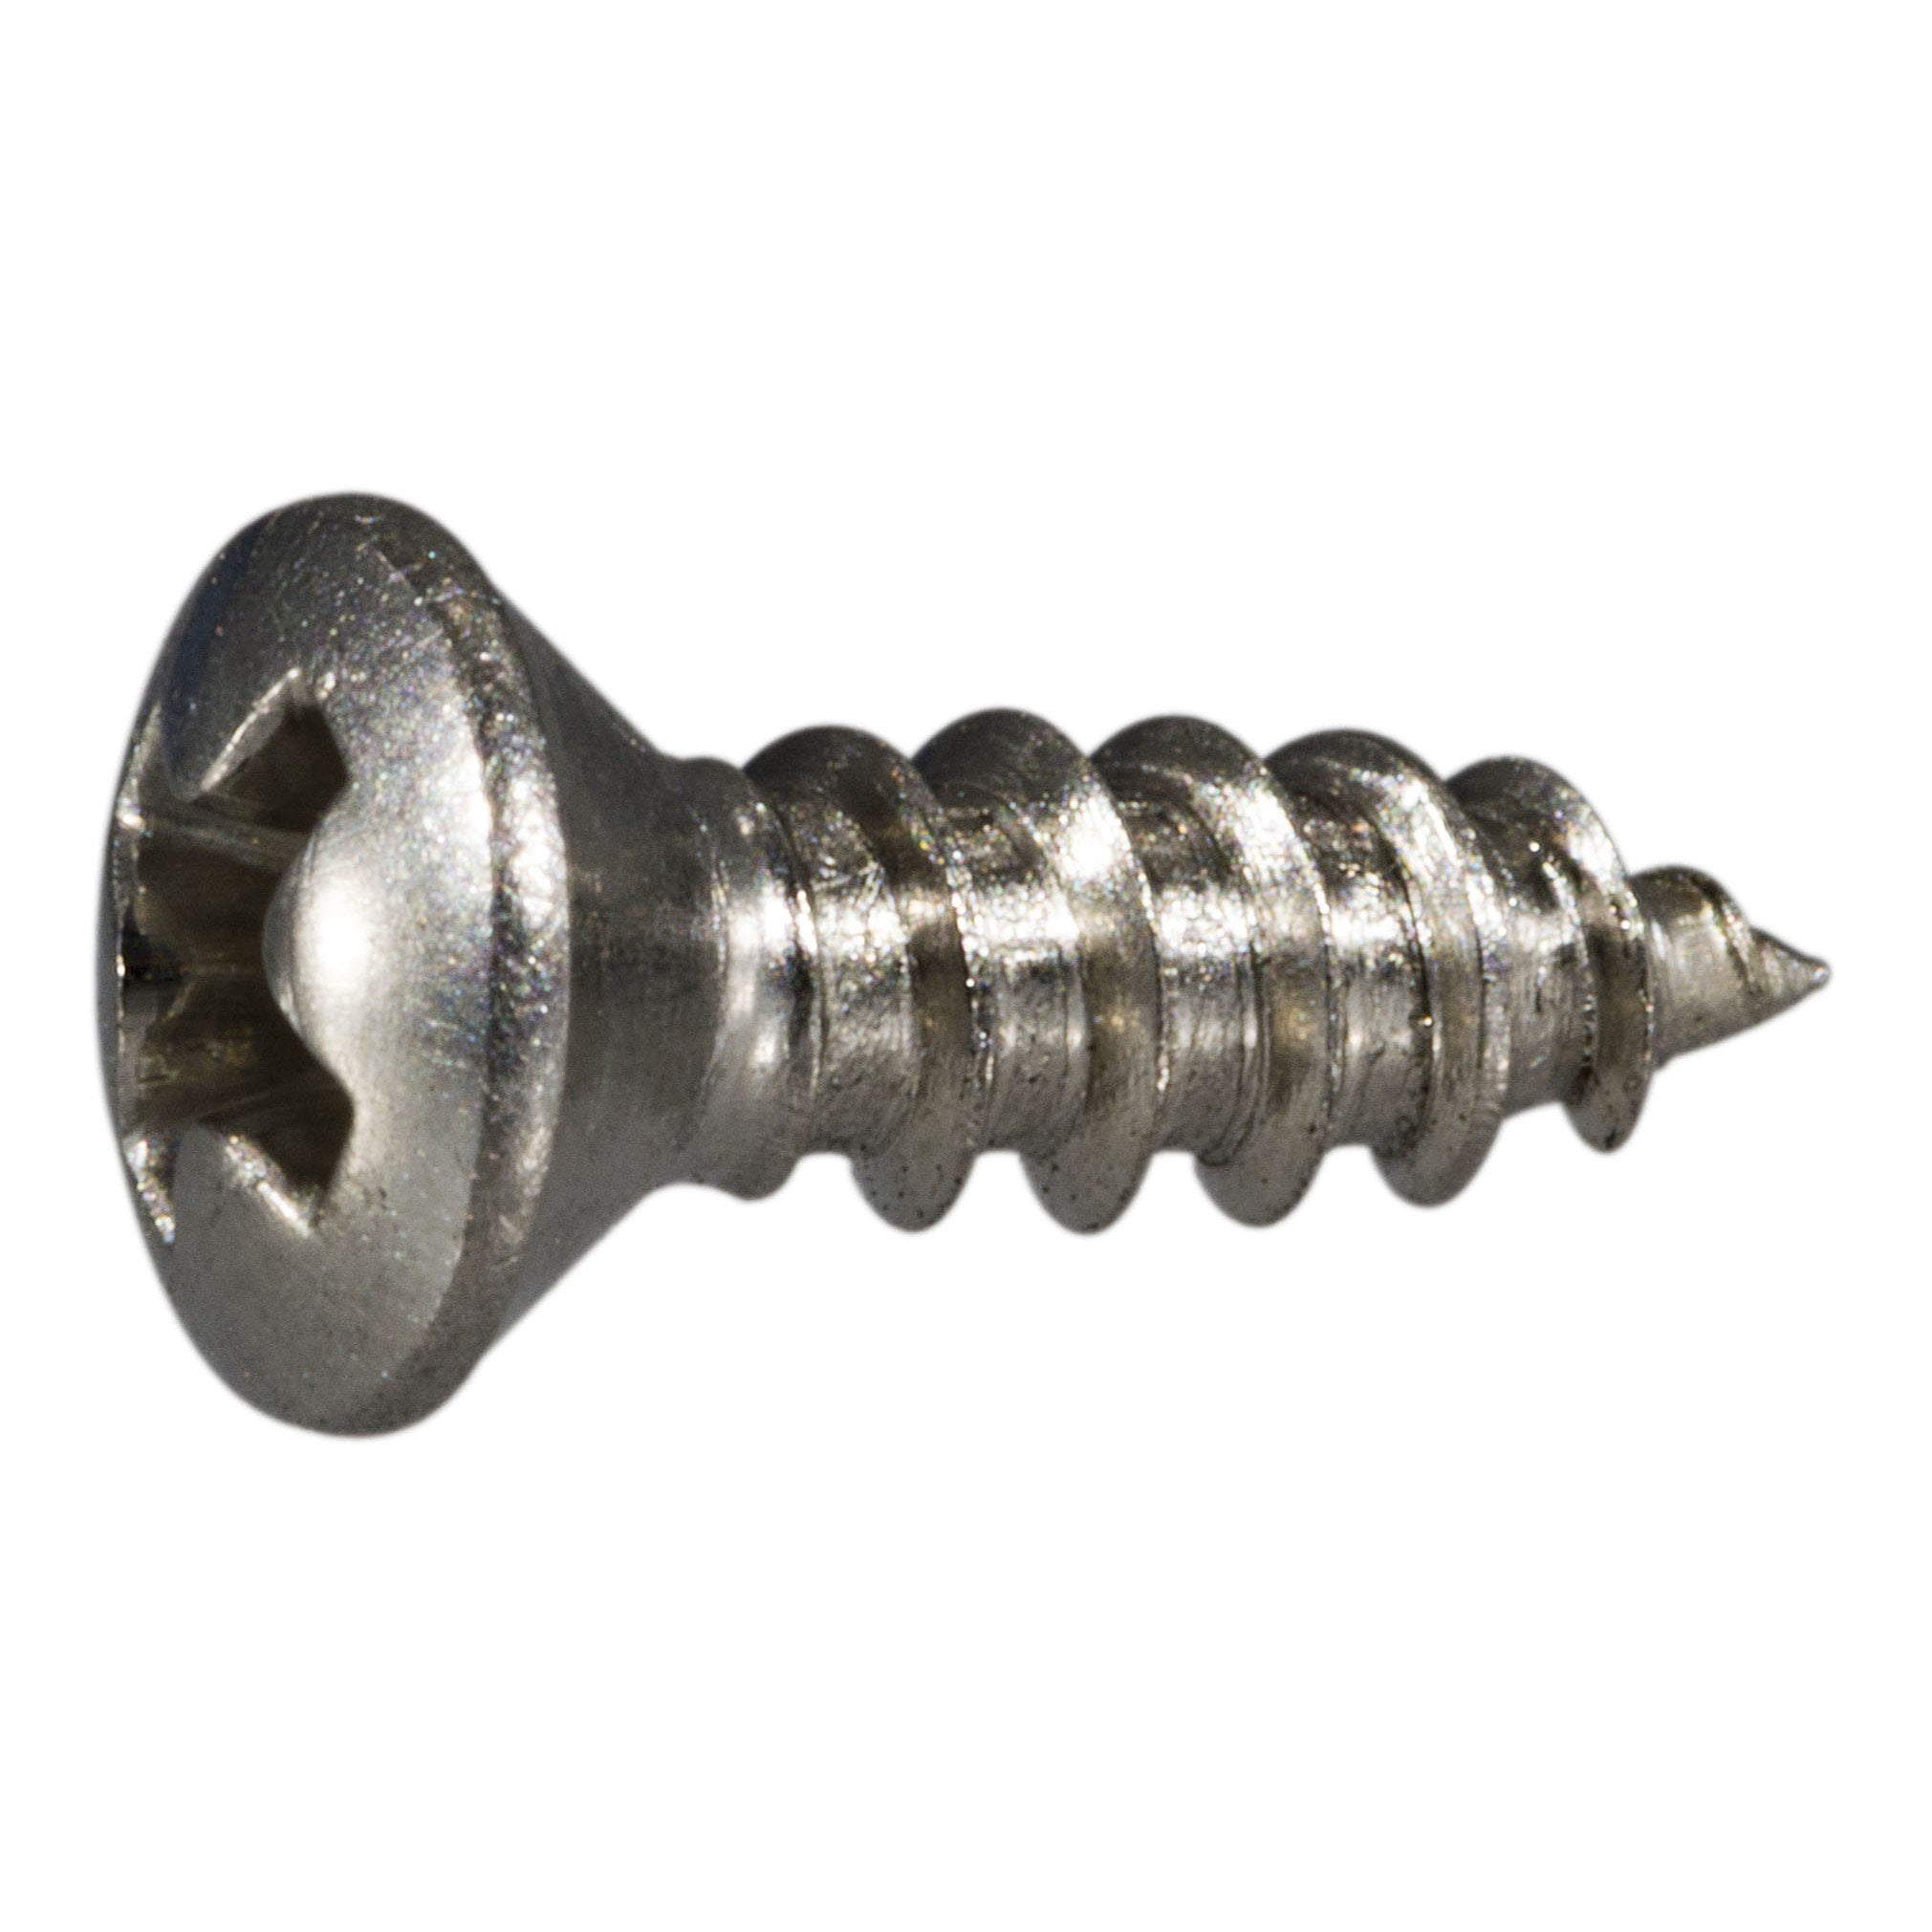 Slotted Oval Head Sheet Metal Screw Stainless Steel #4 x 1/2" Qty 500